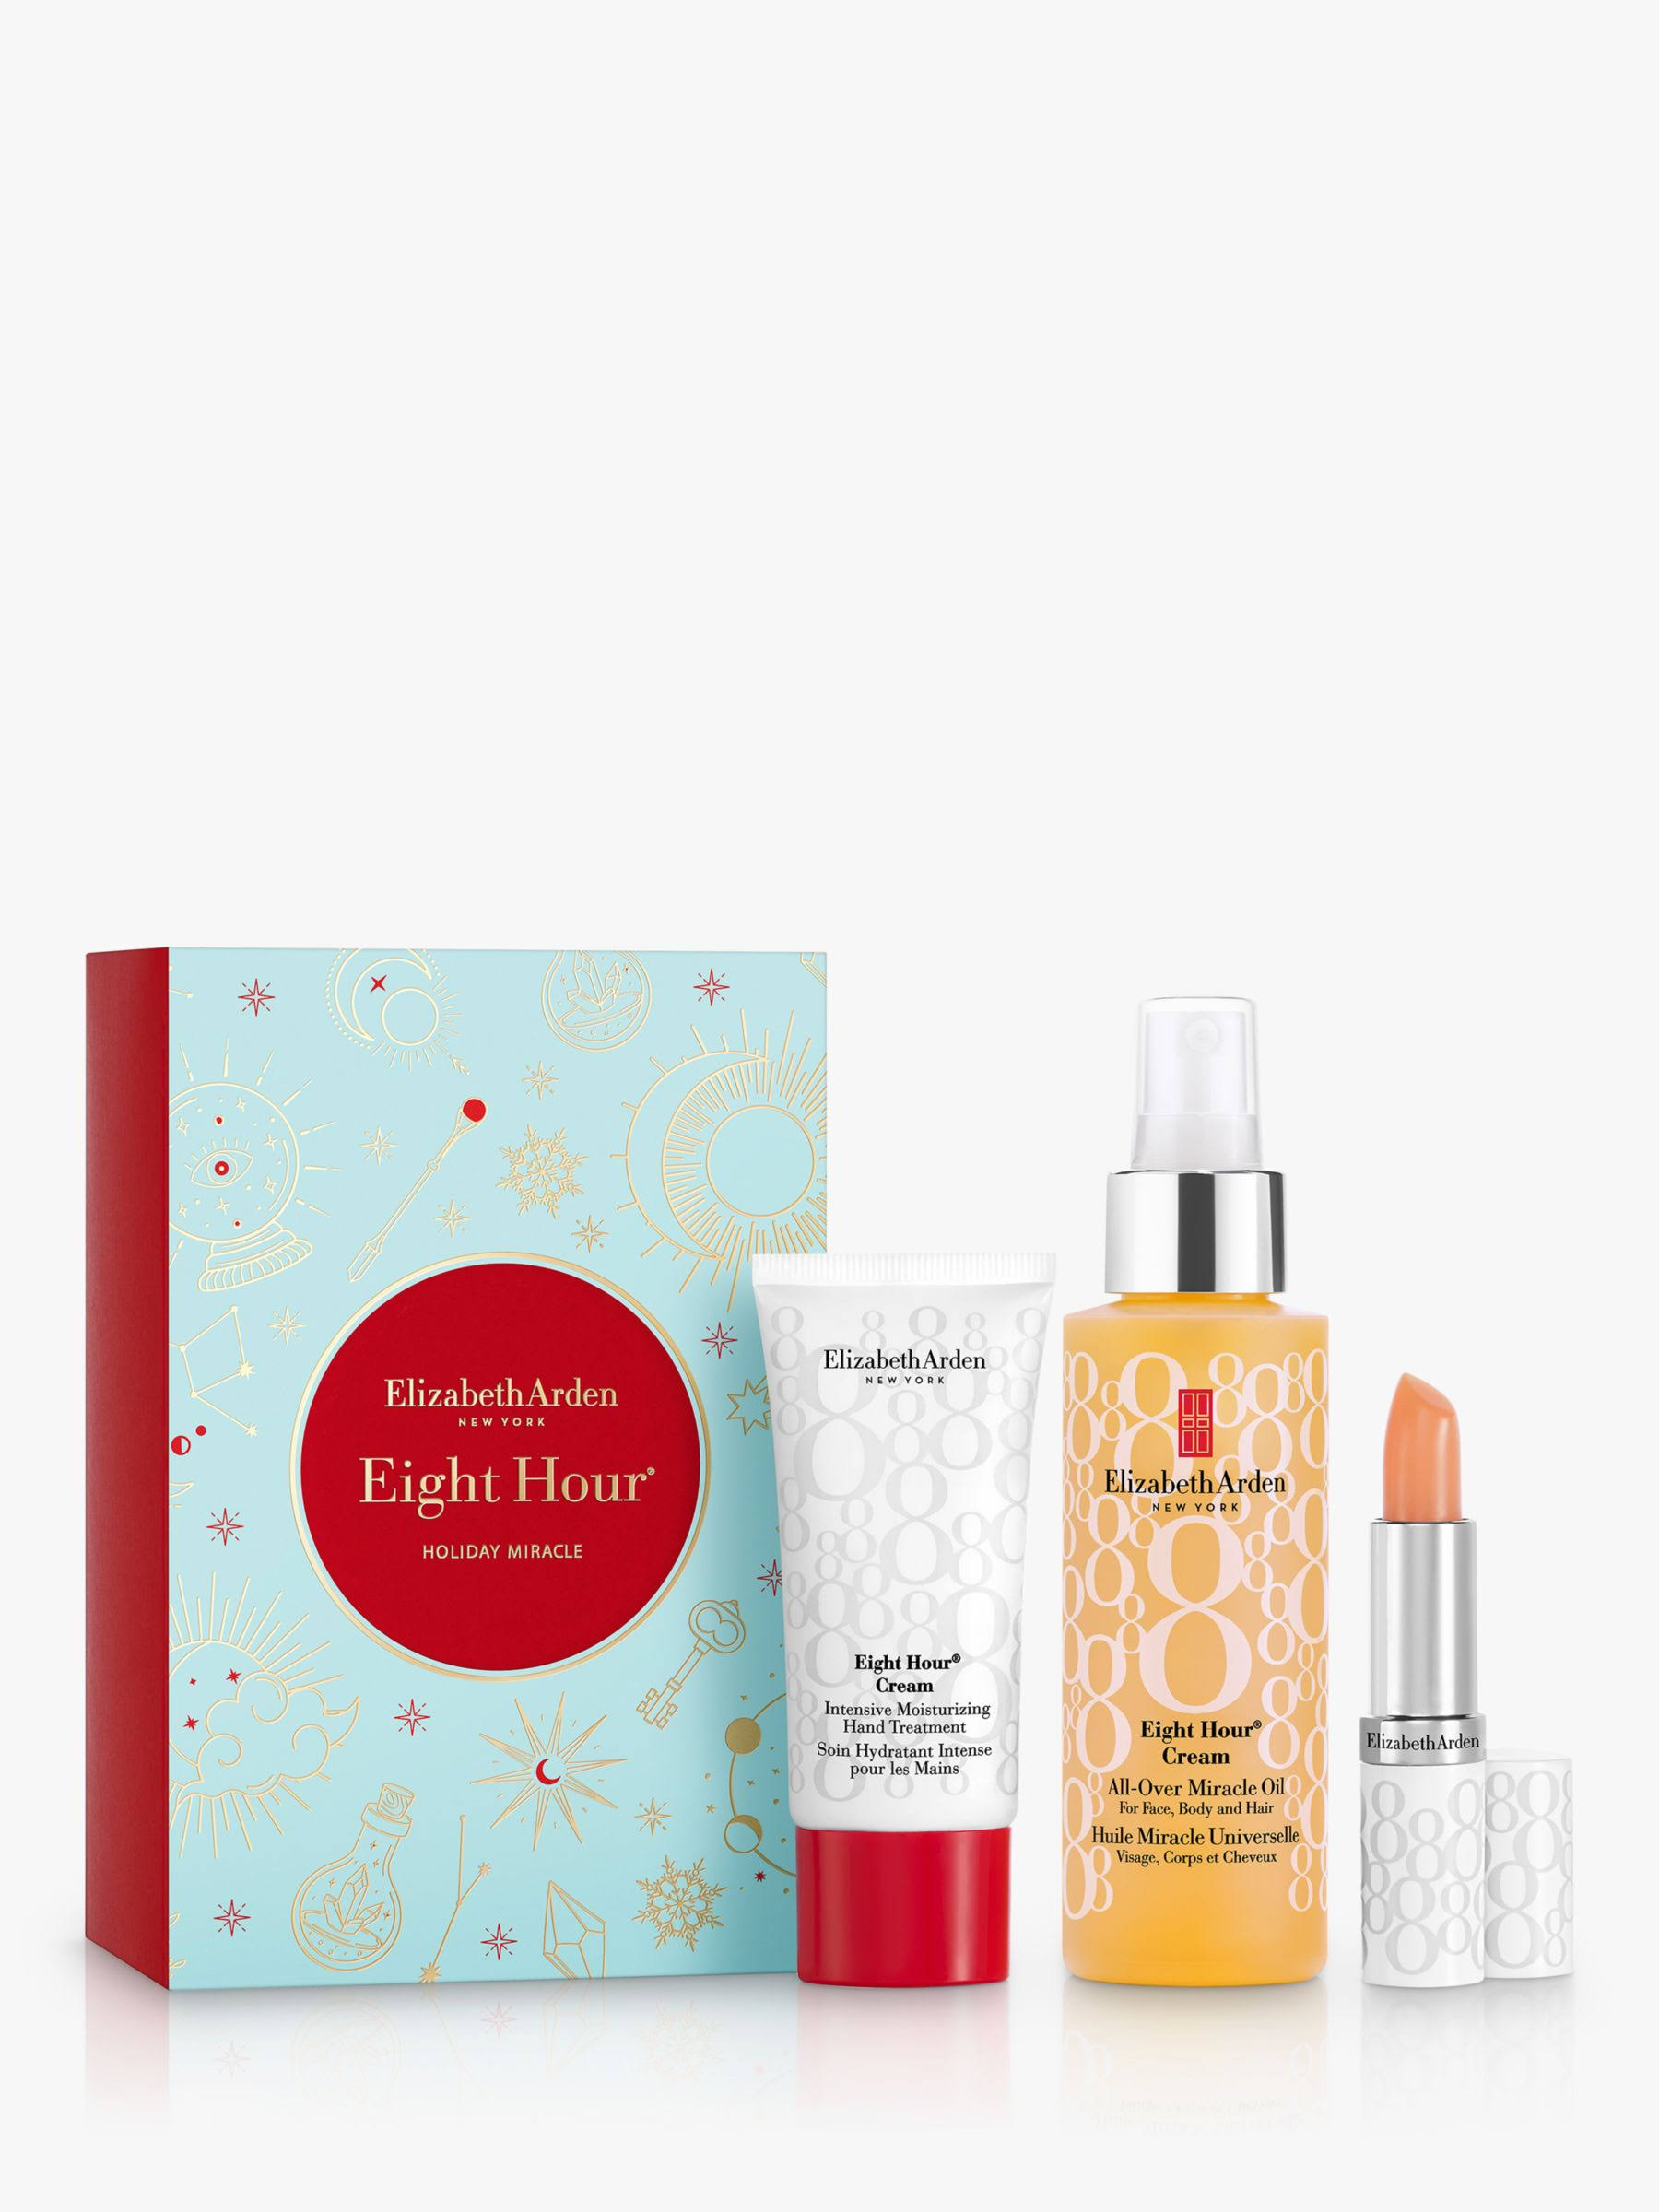 Elizabeth Arden Holiday Miracle Eight Hour 3 Piece Set